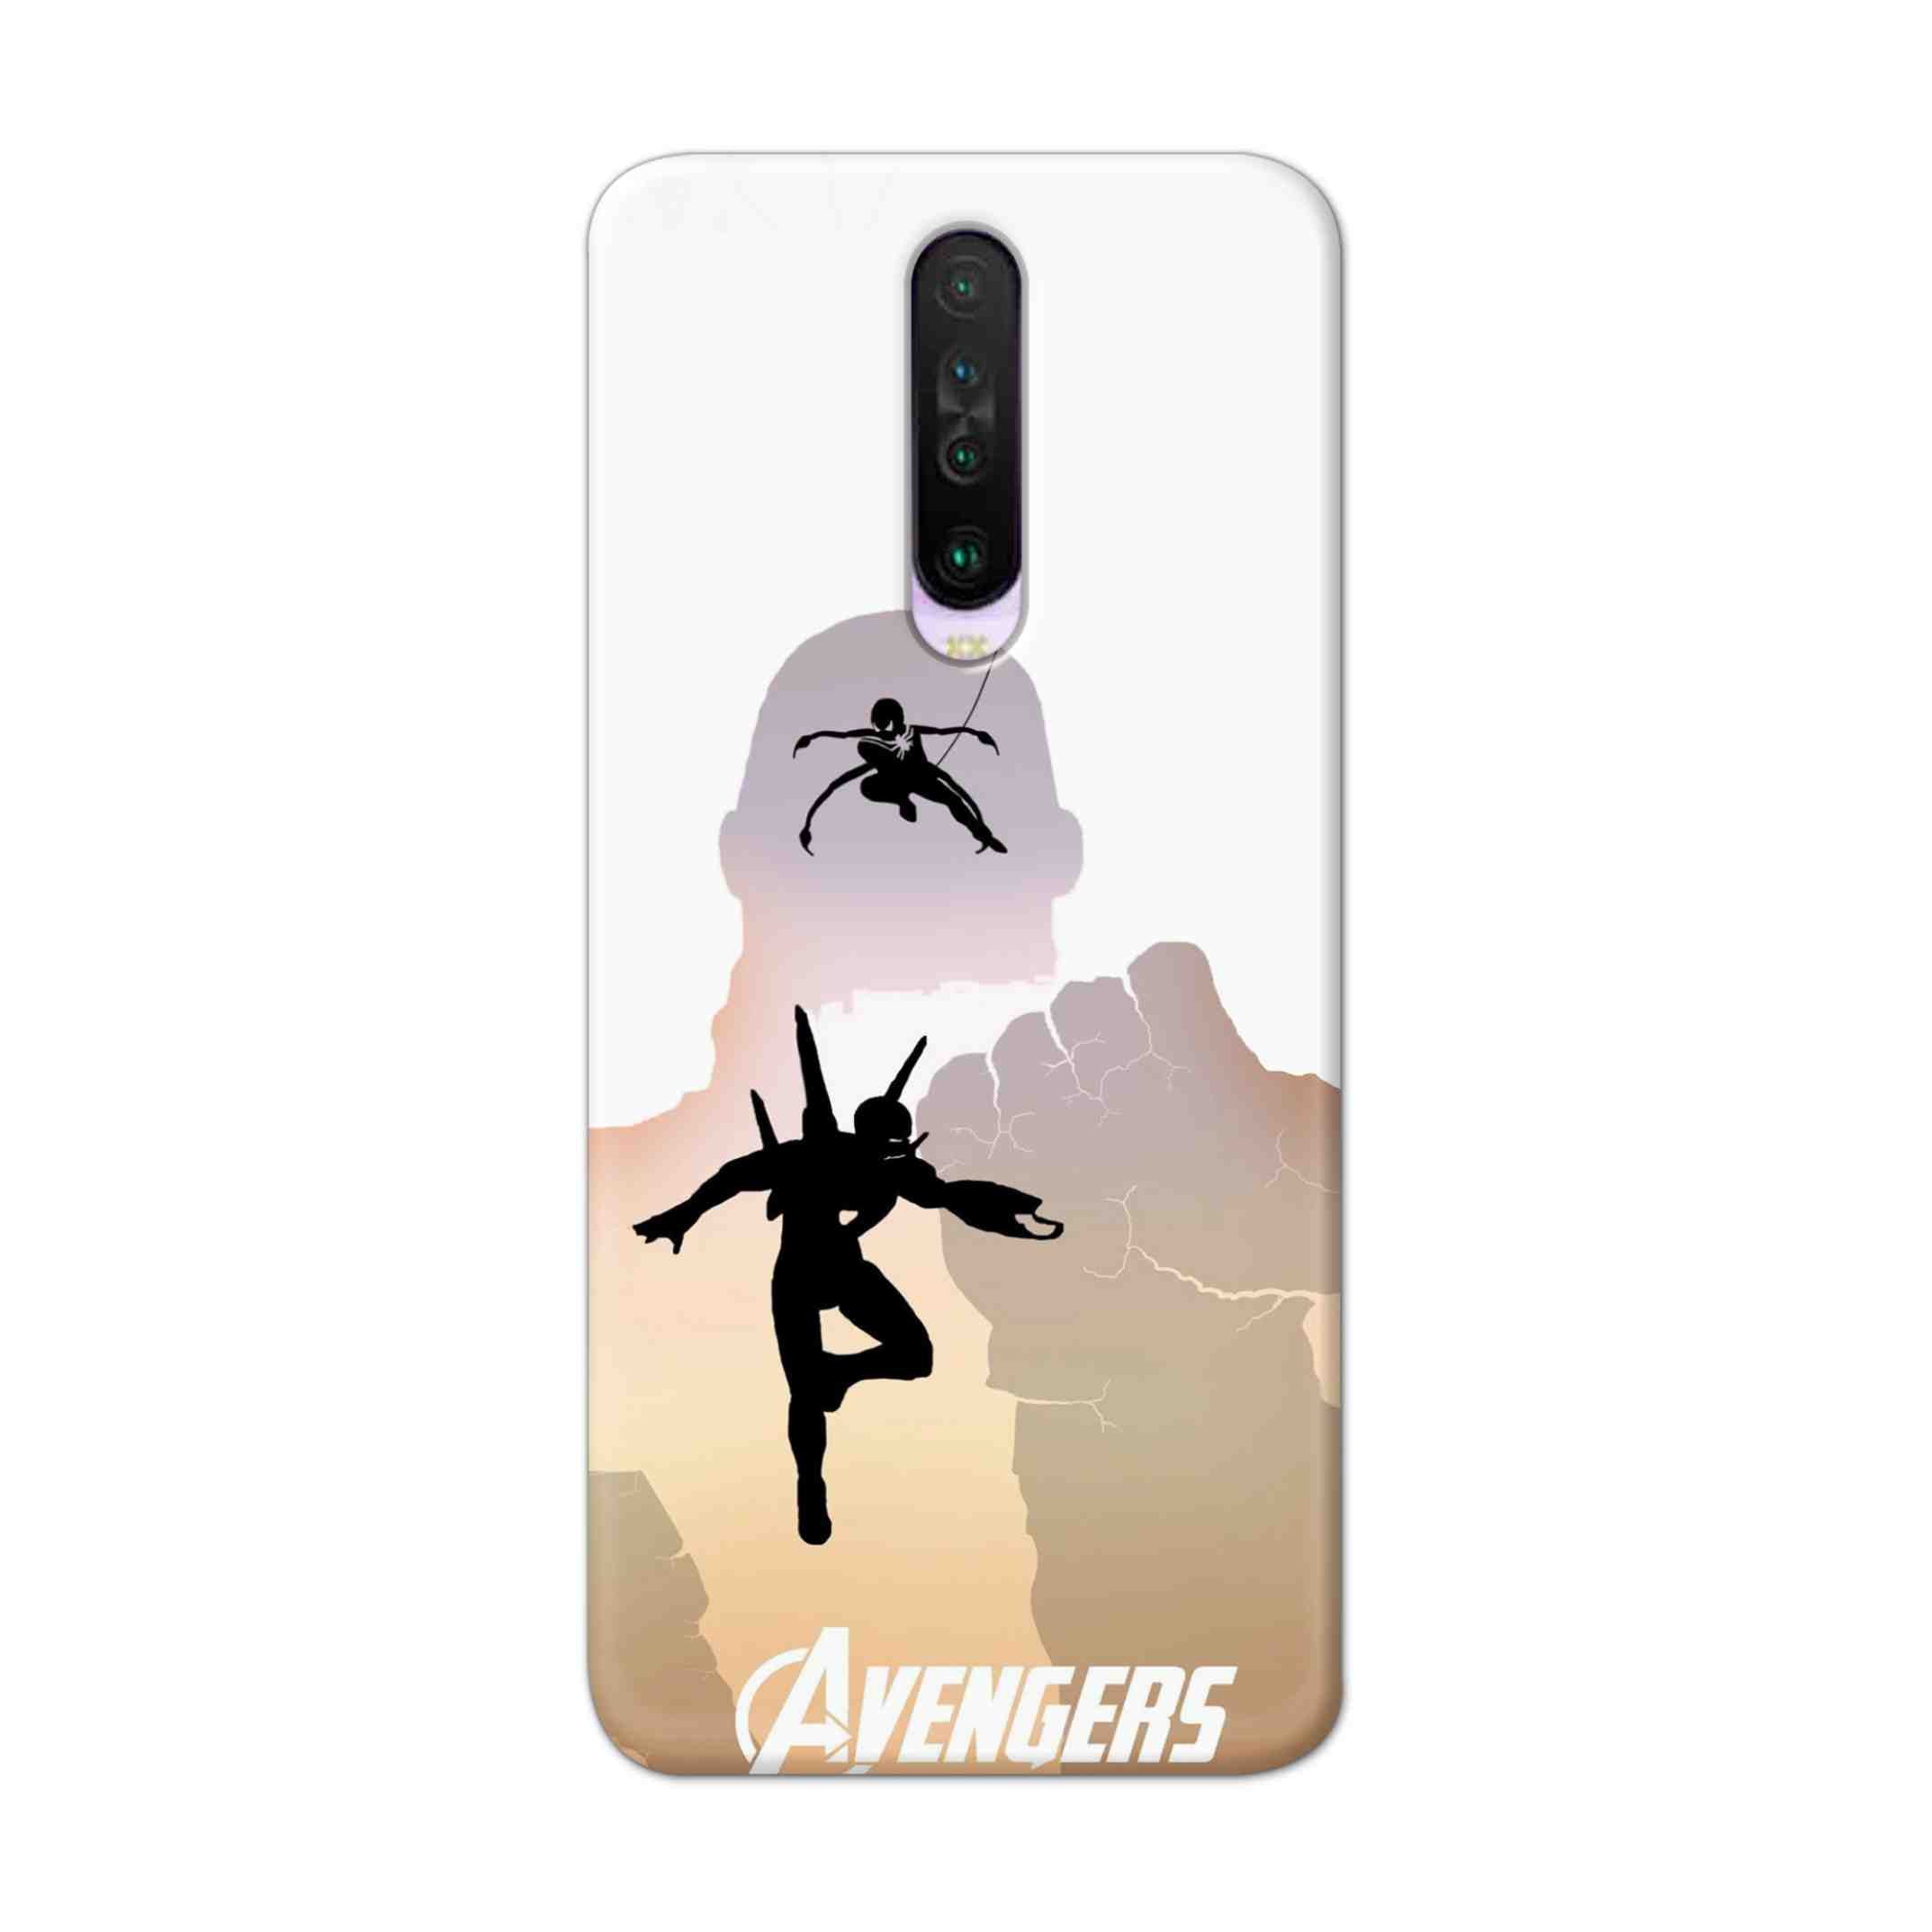 Buy Iron Man Vs Spiderman Hard Back Mobile Phone Case Cover For Poco X2 Online